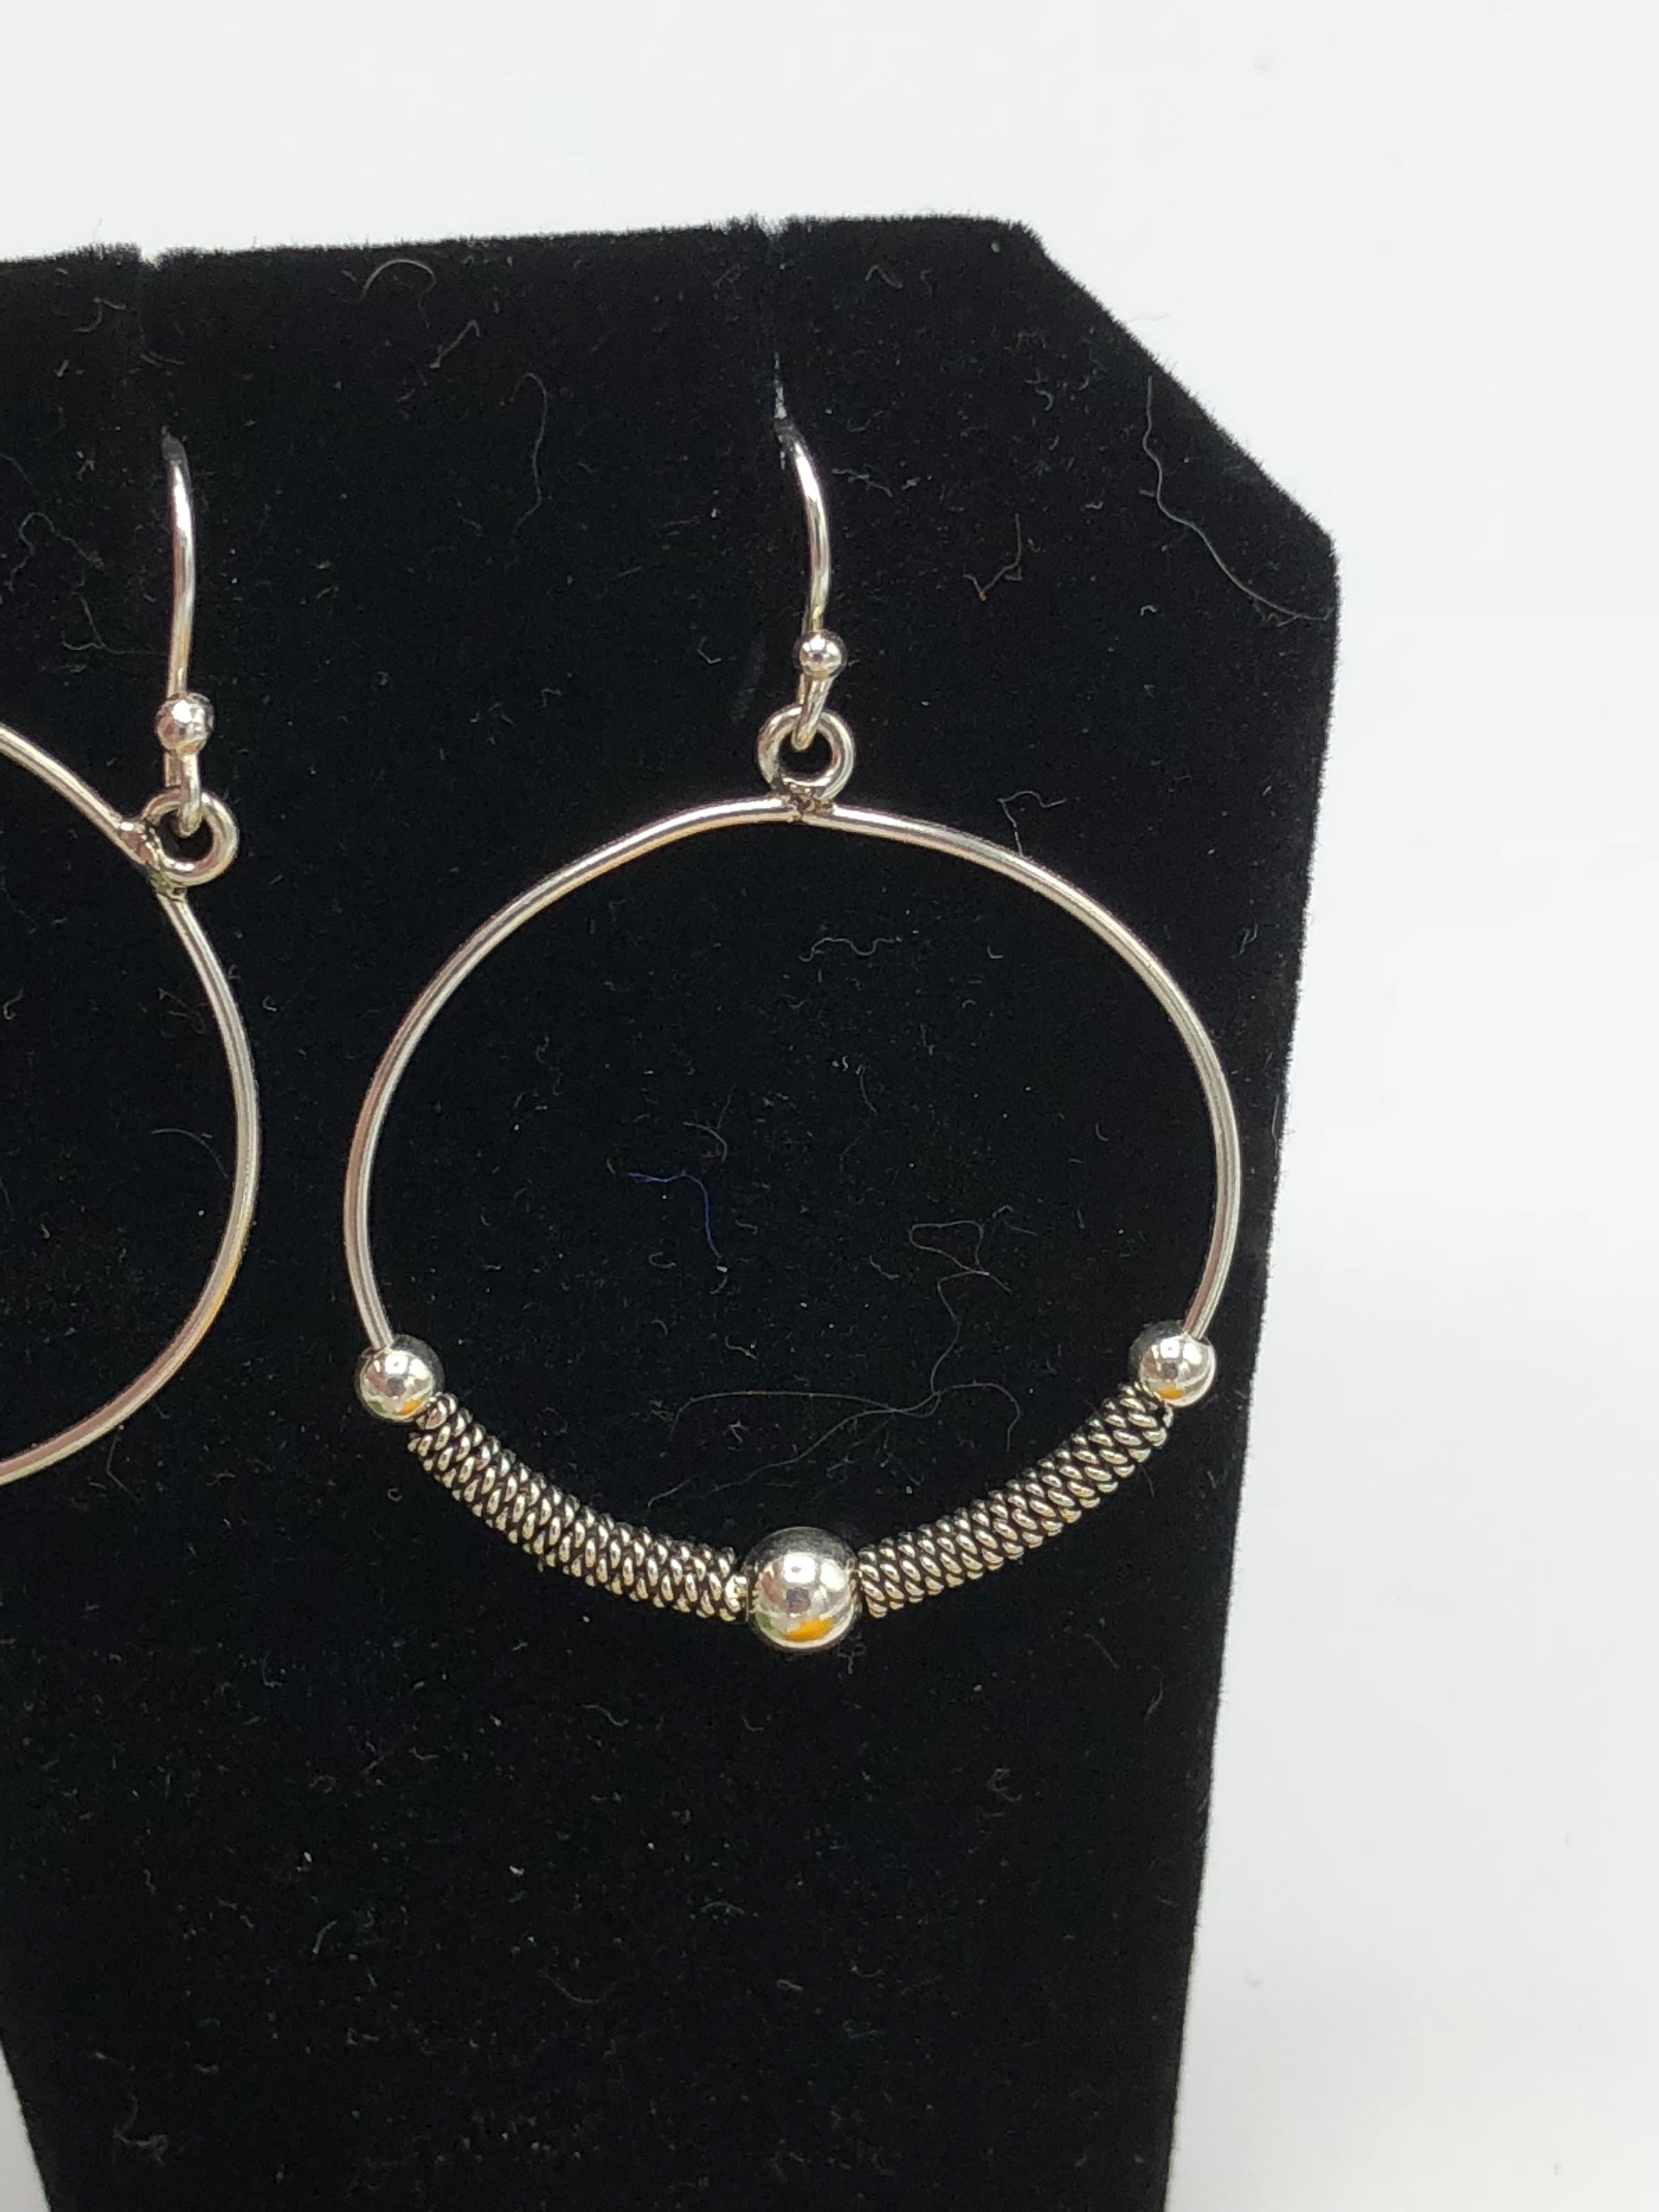 Sterling Earrings antique tone hoops with rope design and silver balls